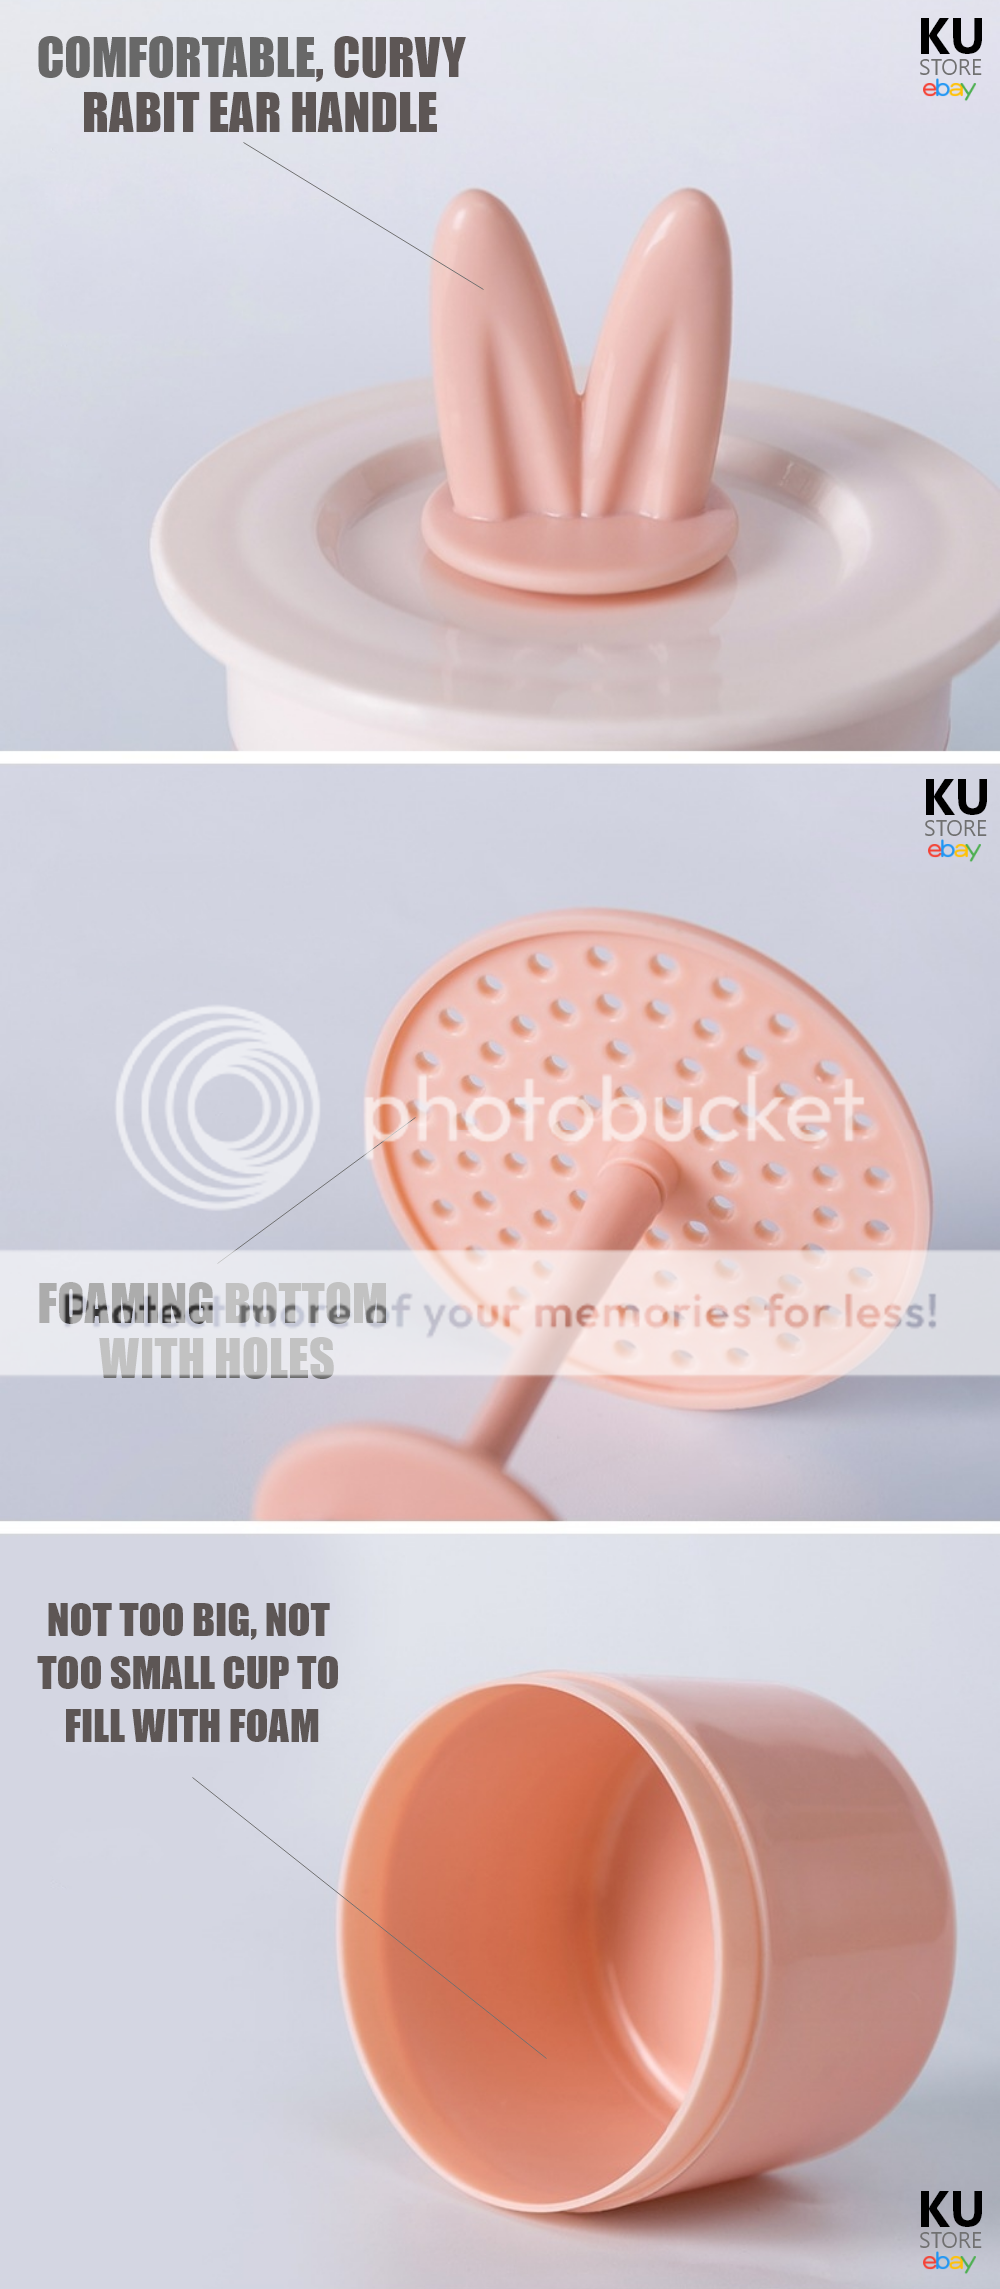 This image shows a Body wash foam maker which saves Body wash and your money